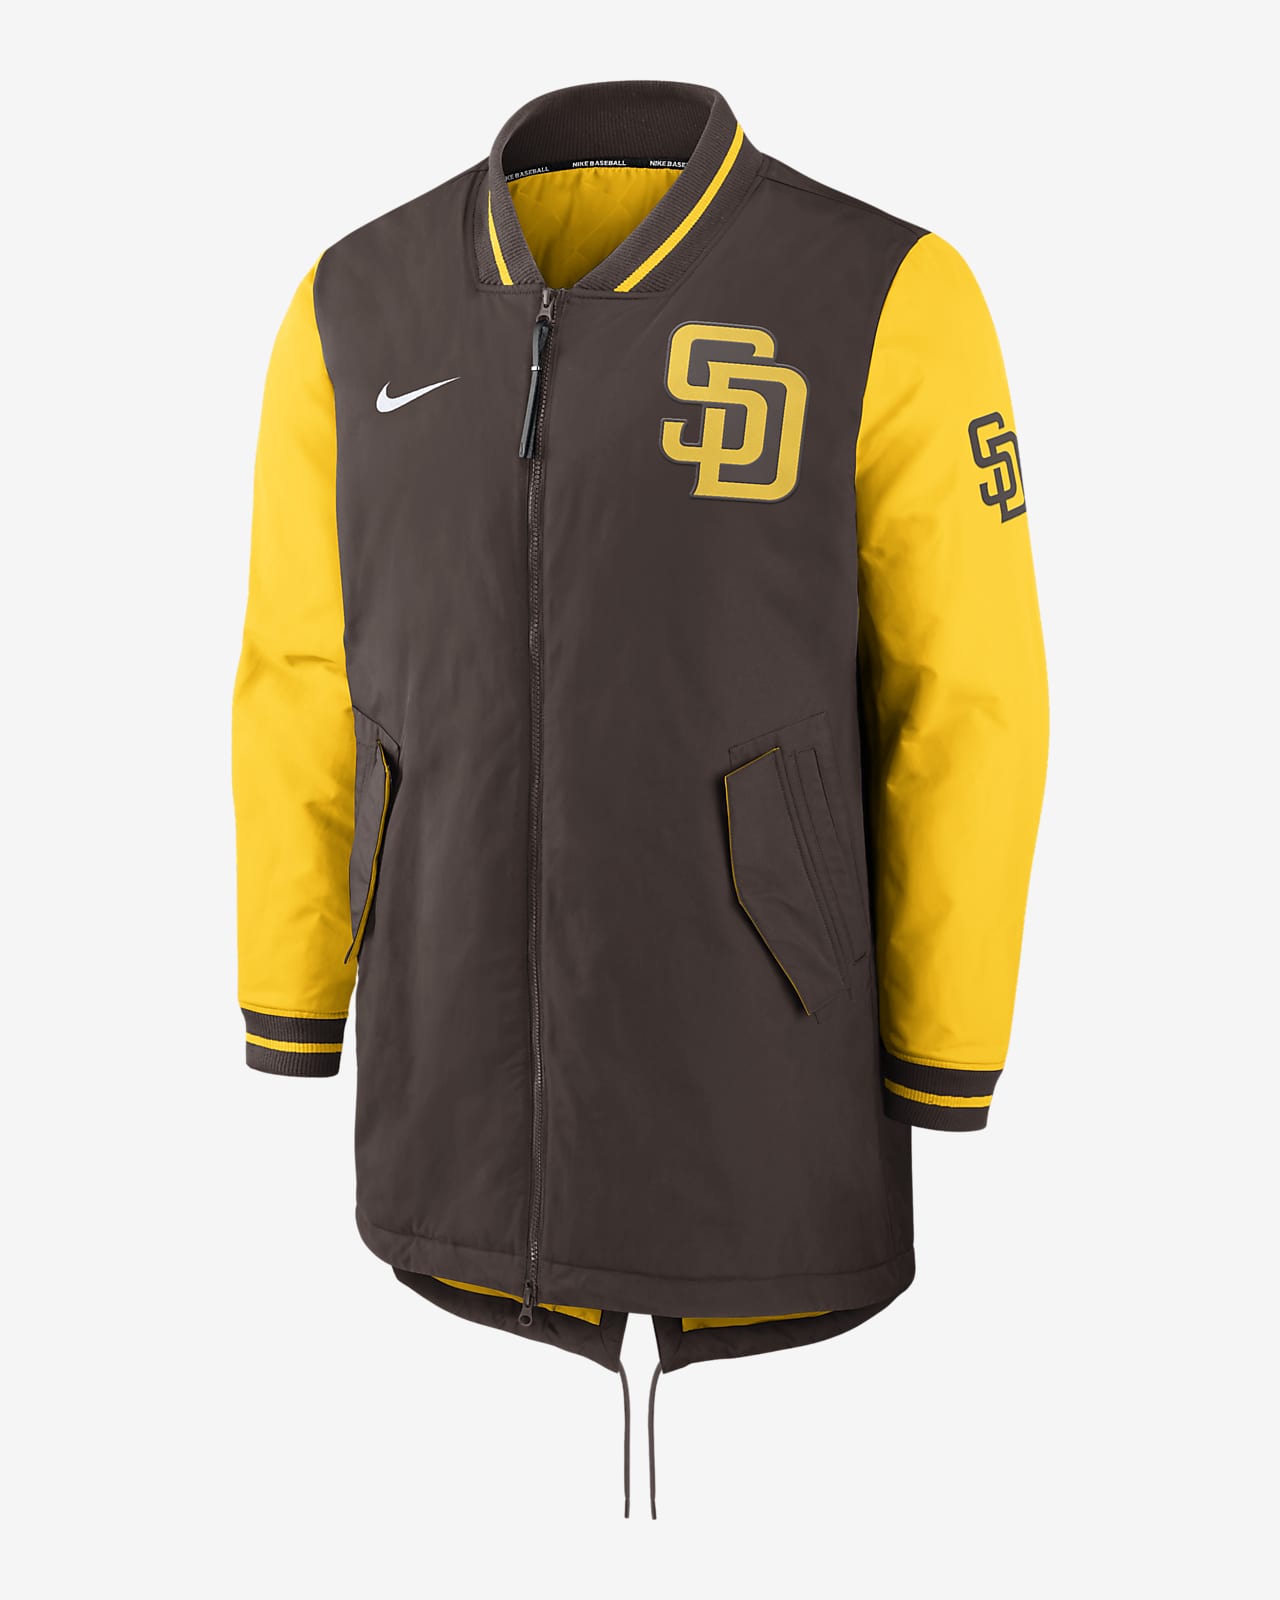 city connect san diego padres